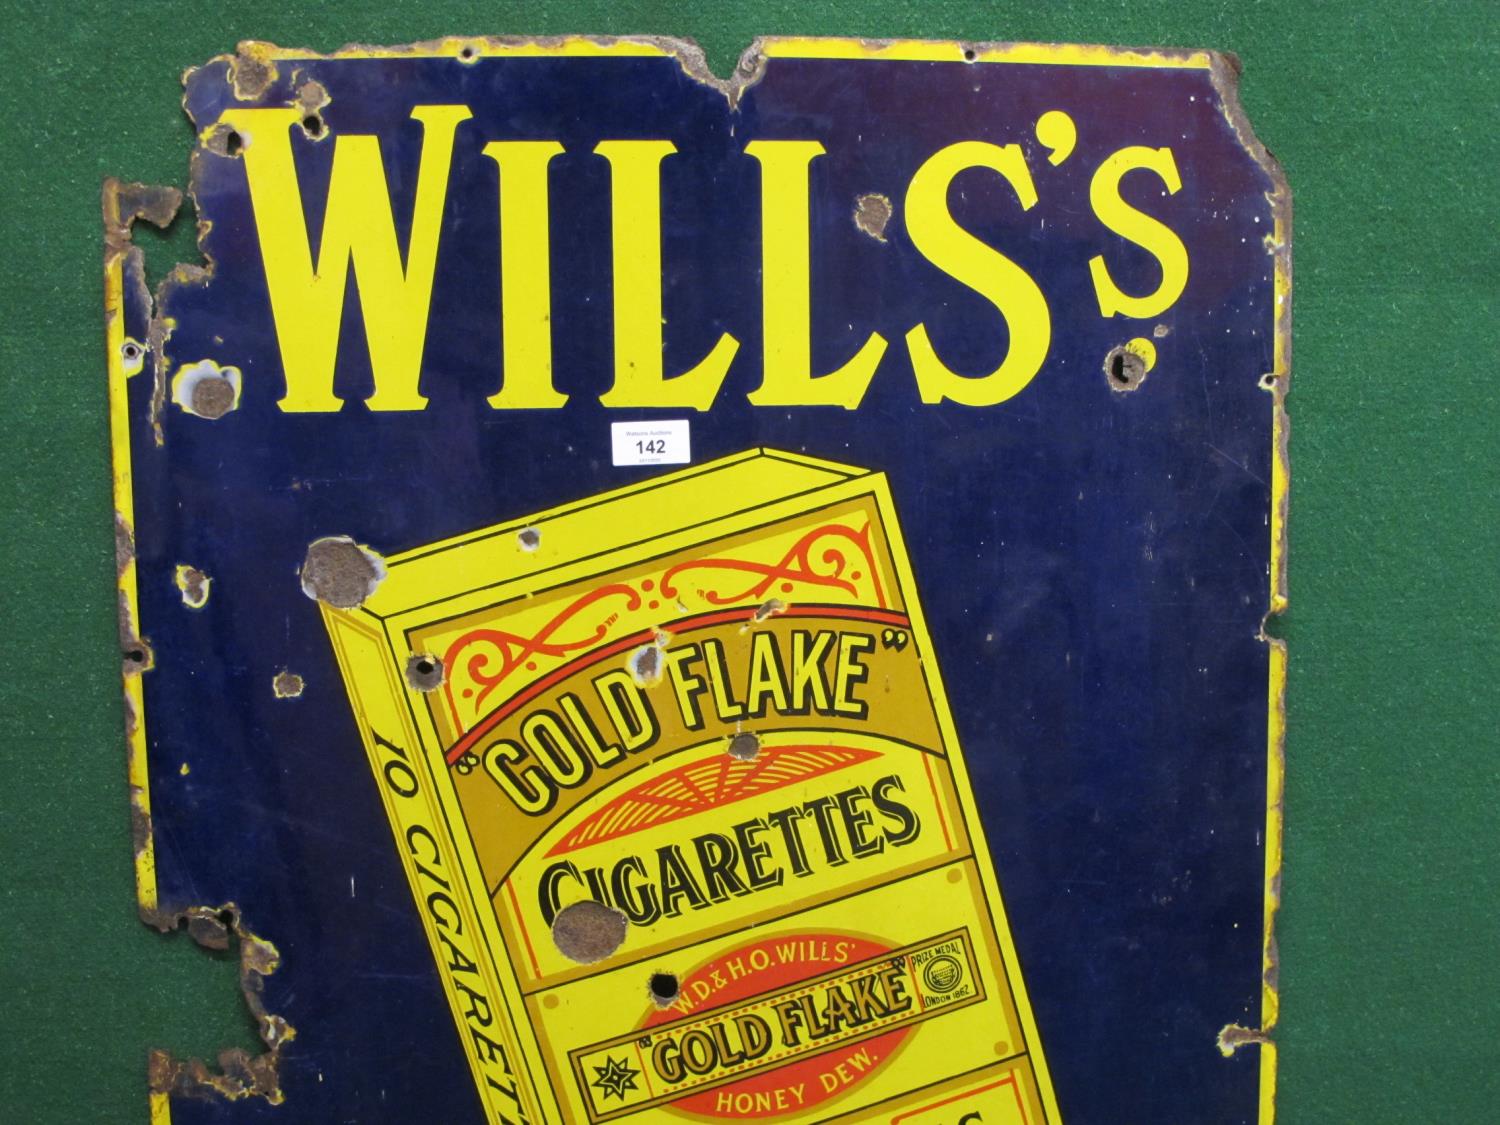 Enamel sign for Wills's Cigarettes Sold Here featuring a packet of Gold Flake Honeydew. Yellow, - Image 3 of 4